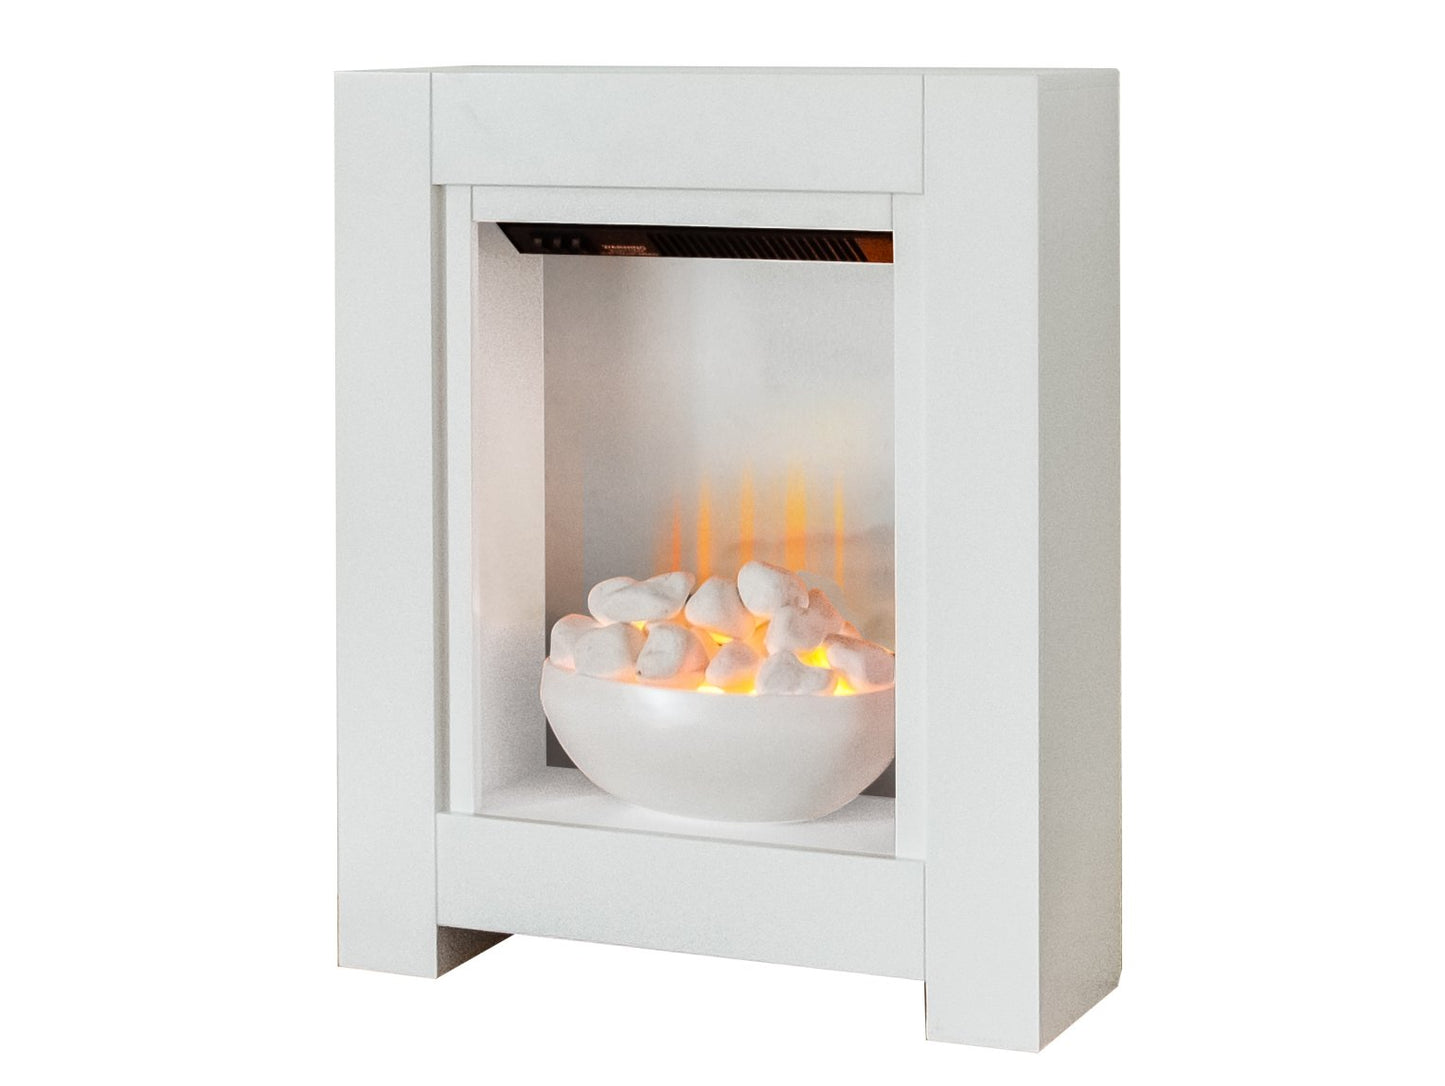 Adam Monet Fireplace Suite Pure White + Electric Fire, 23"